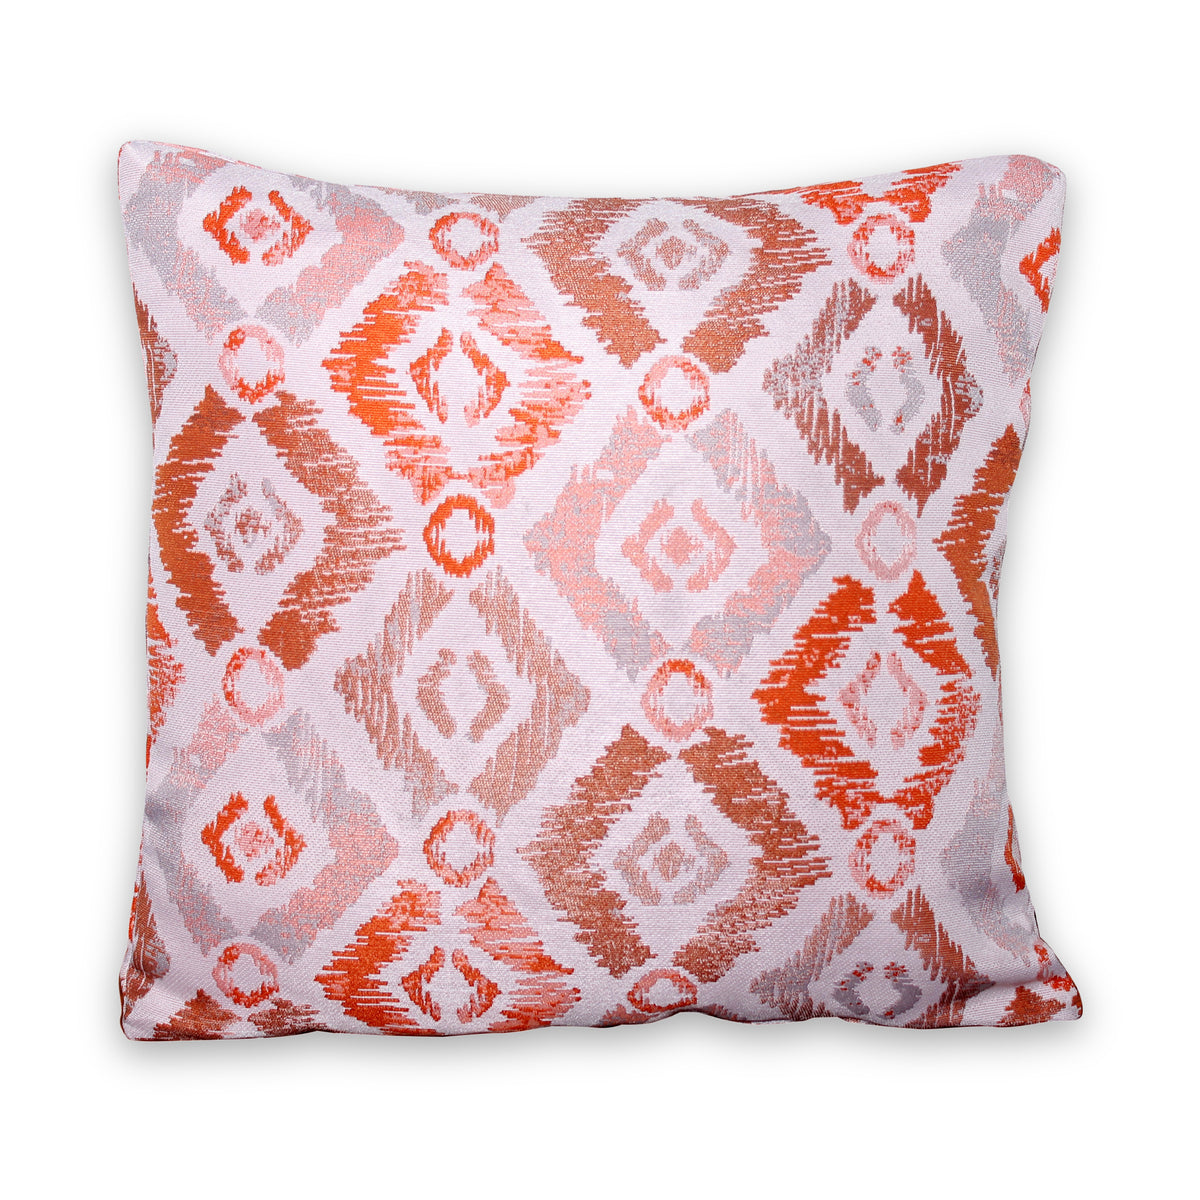 Outdoor Orange Patterned Scatter Cushion from Roseland